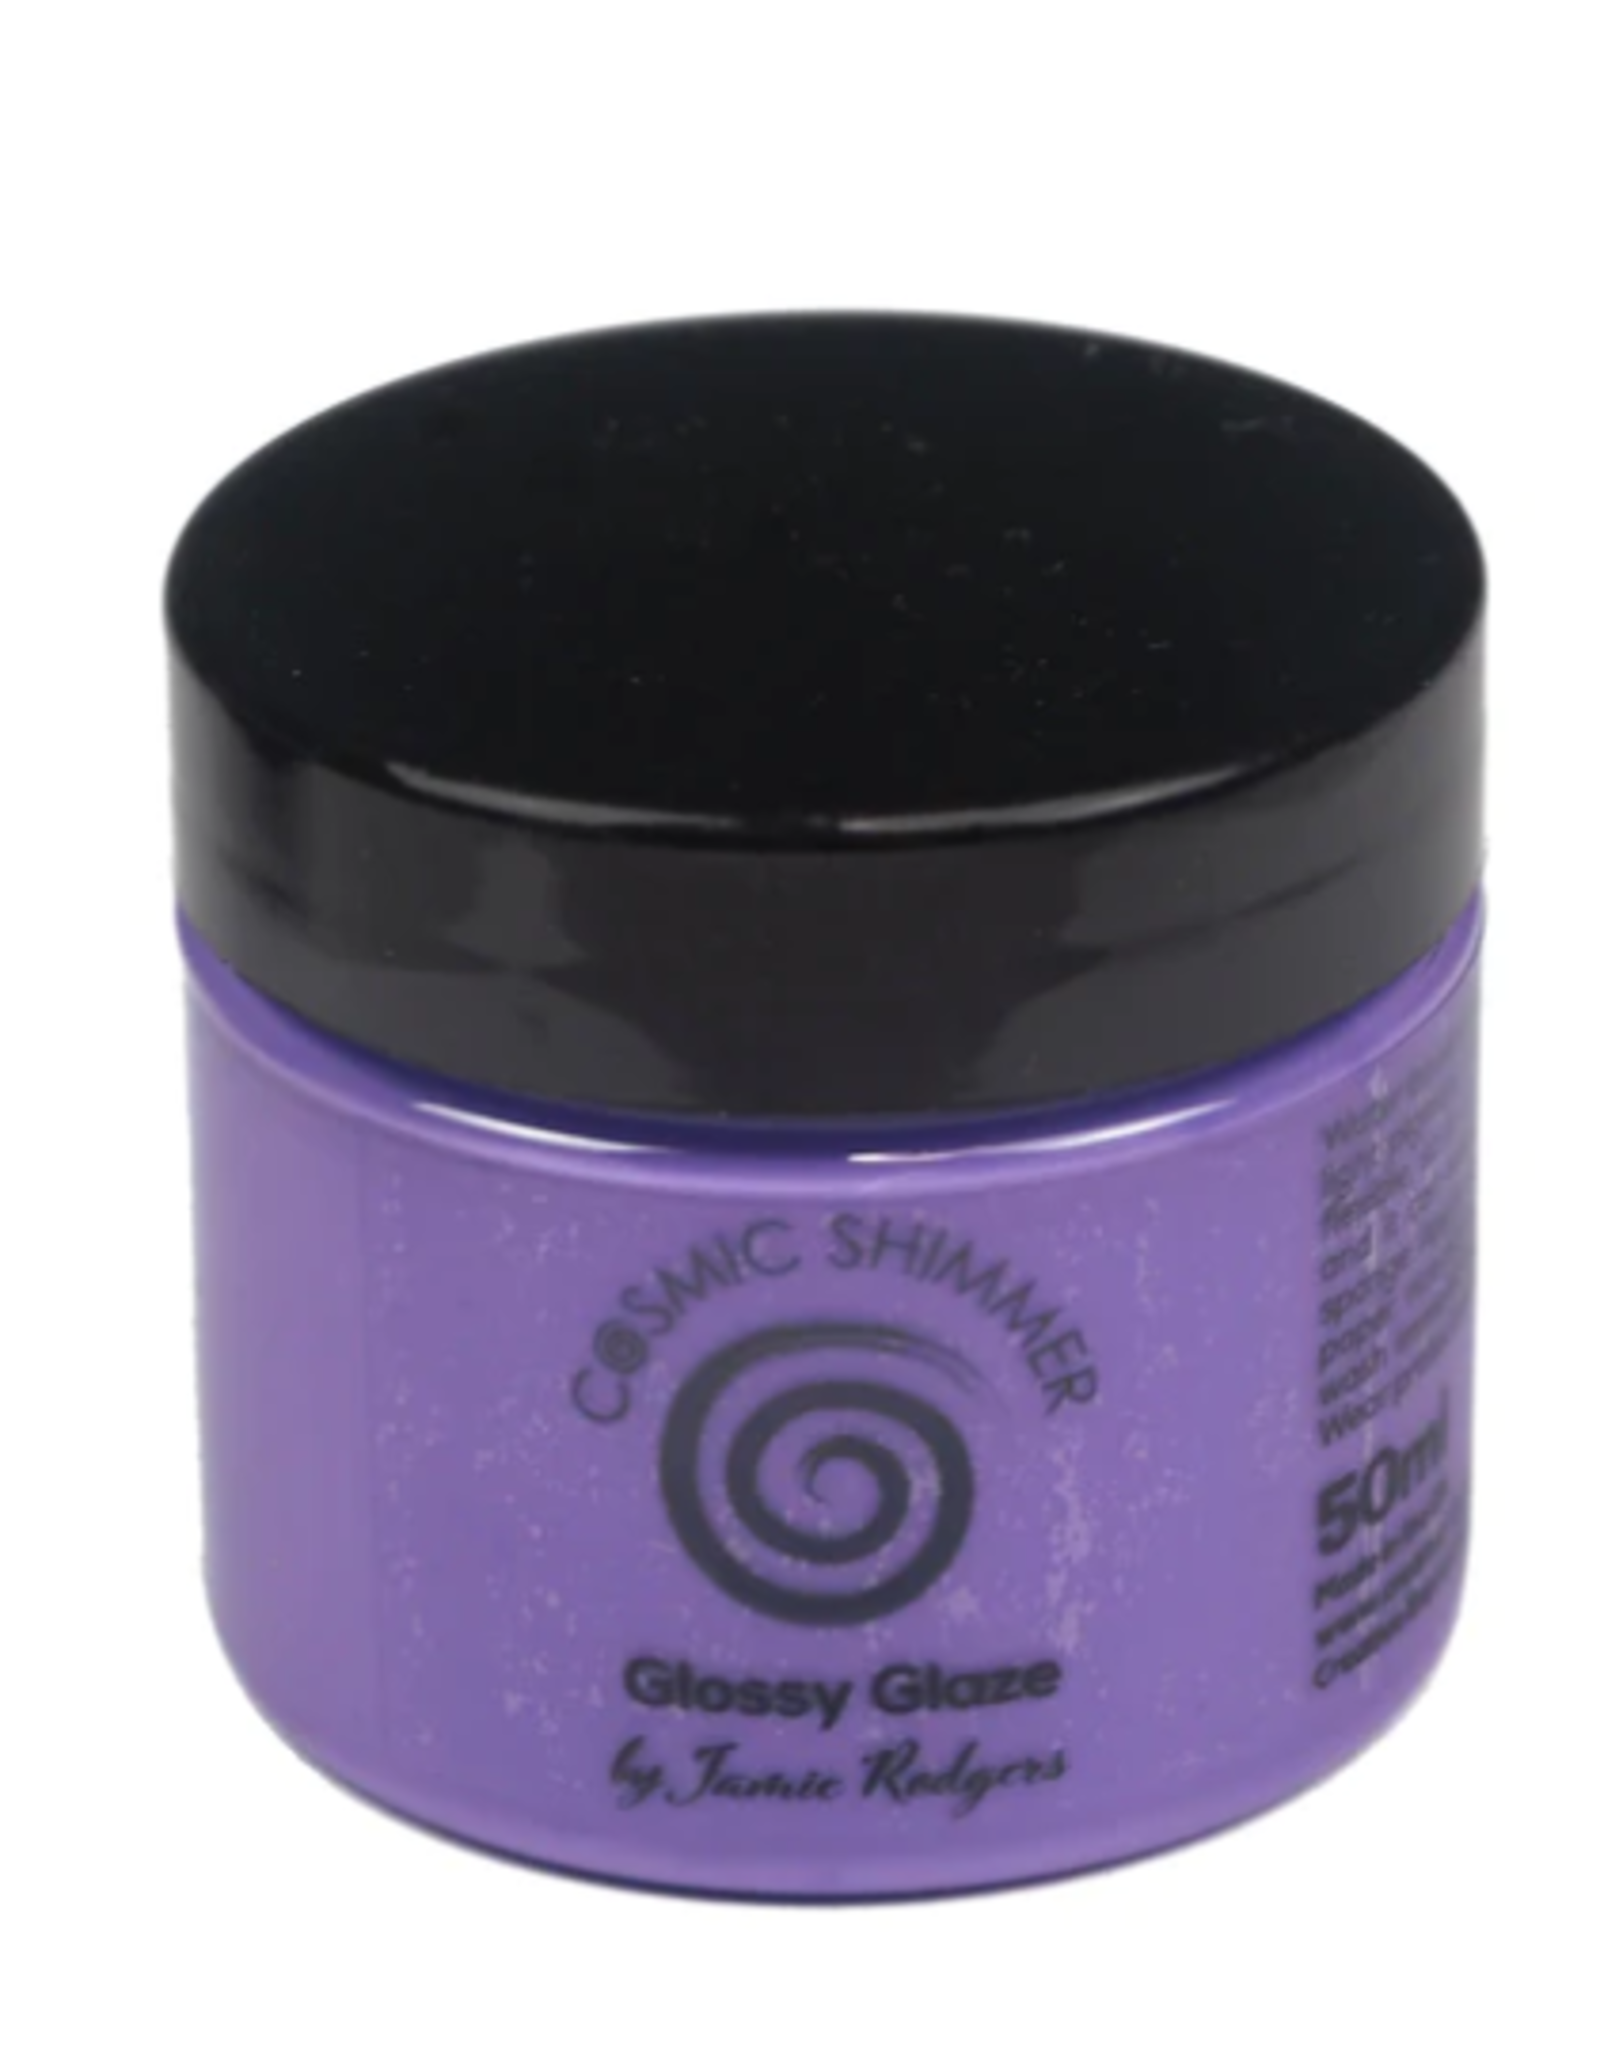 CREATIVE EXPRESSIONS CREATIVE EXPRESSION COSMIC SHIMMER JAMIE RODGERS PARISIAN PURPLE GLOSSY GLAZE 50ml